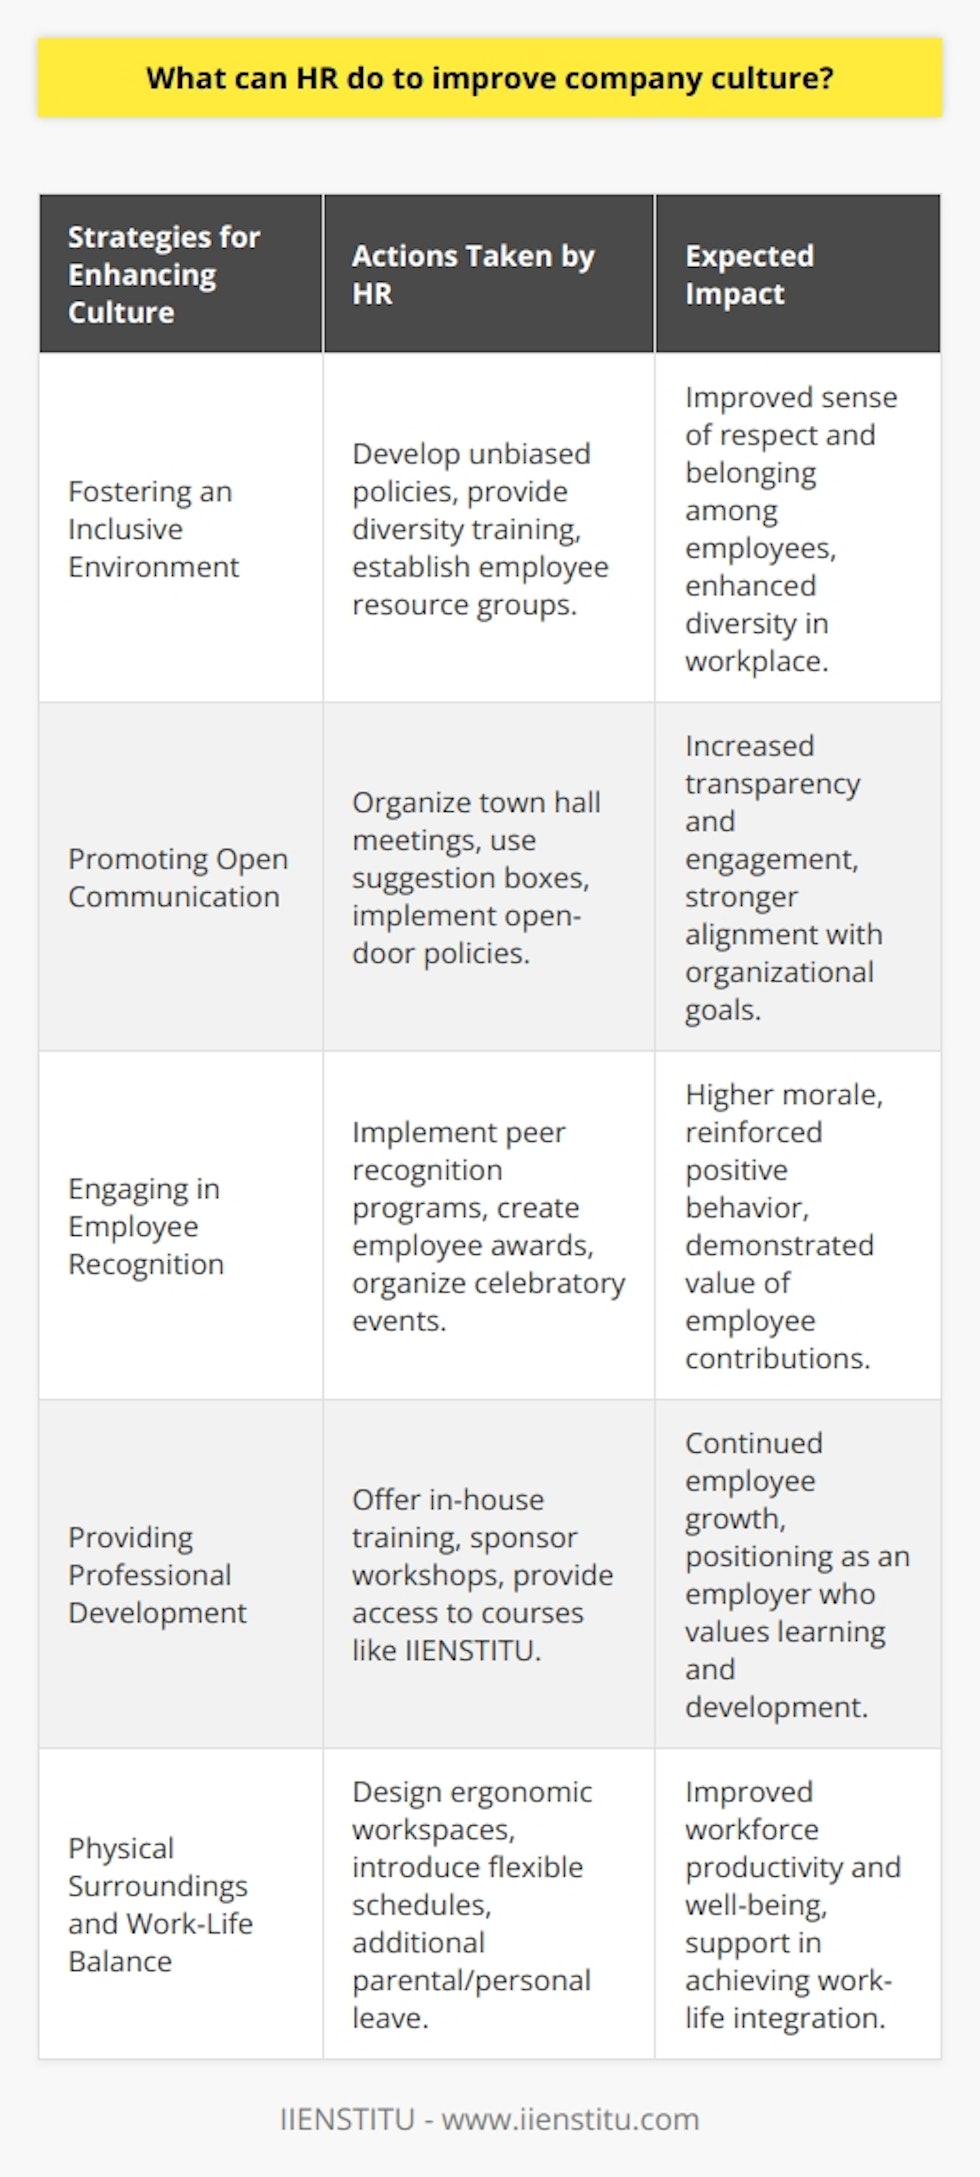 The Role of HR in Enhancing Company CultureCompany culture is pivotal in driving organizational success and employee satisfaction. The Human Resources (HR) department plays a crucial role in shaping and sustaining a positive company culture. Here are several ways in which HR can nurture a culture that resonates with the organization's values and objectives:**Fostering an Inclusive Environment**HR should strive to create an inclusive workplace where diversity is valued, and all employees feel respected and included regardless of their background. This involves developing policies that are free from bias and offering diversity training to ensure all employees are aware of the importance of inclusivity in the workplace. Additionally, HR can create platforms such as employee resource groups to allow individuals from various backgrounds to share their experiences and contribute to the company's diversity initiatives.**Promoting Open Communication**A culture of open communication requires transparent and honest dialogue between all levels of staff. HR can facilitate this by setting up regular town hall meetings, anonymous suggestion boxes, and open-door policies where employees are encouraged to share their feedback. When employees feel their opinions are valued, they are more likely to be engaged and committed to the company's success.**Engaging in Employee Recognition**Recognition of employees' hard work and contributions can have a profound impact on morale and culture. HR can lead by implementing peer-to-peer recognition programs, employee awards, and celebratory events to publicly acknowledge achievements. This not only reinforces positive behavior but also shows the company's commitment to its employees.**Providing Professional Development Opportunities**By offering continuous learning and development opportunities, HR can position the organization as one that invests in its employees' growth. This could take the form of in-house training sessions, sponsoring external workshops, or even providing access to online platforms like IIENSTITU that offer a variety of courses for professional advancement.**Physical Surroundings and Work-Life Balance**The physical environment of the workplace can greatly affect employee morale and productivity. HR plays a role in designing workspaces that cater to different working styles and promote well-being. Ensuring ergonomic furniture, optimizing lighting, and providing recreational areas are small changes that can make a big difference.An aspect closely related to physical surroundings is the emphasis on a healthy work-life balance. HR can introduce flexible working schedules, the option to work remotely, or consider additional parental and personal leave to support employees in balancing their personal and professional lives.In summary, HR departments are the stewards of company culture, and their actions can deeply influence the organizational atmosphere. By promoting inclusivity, open communication, recognition, professional development, and attention to the physical work environment and work-life integration, HR can lay the groundwork for a thriving company culture that attracts and retains talent, and propels the organization forward.